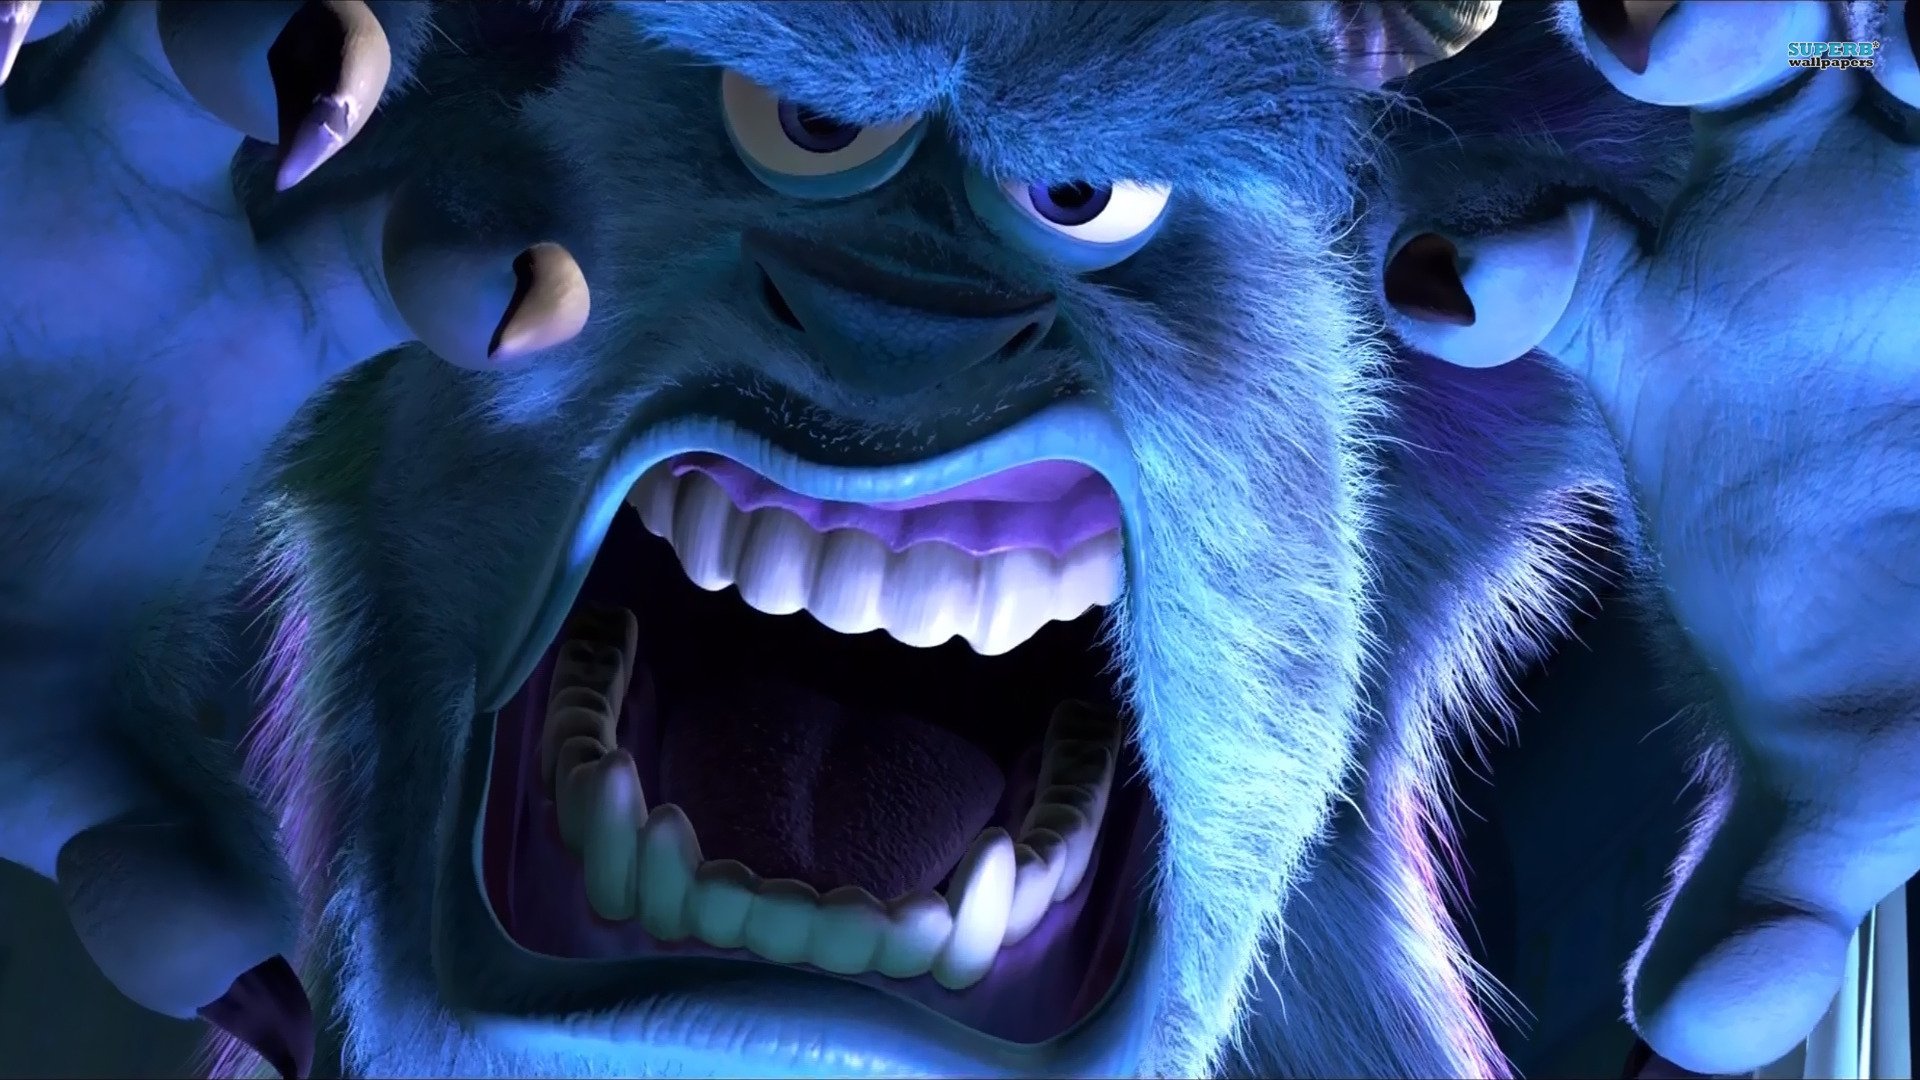 Monsters Inc. (USA 2001; Pete Docter)